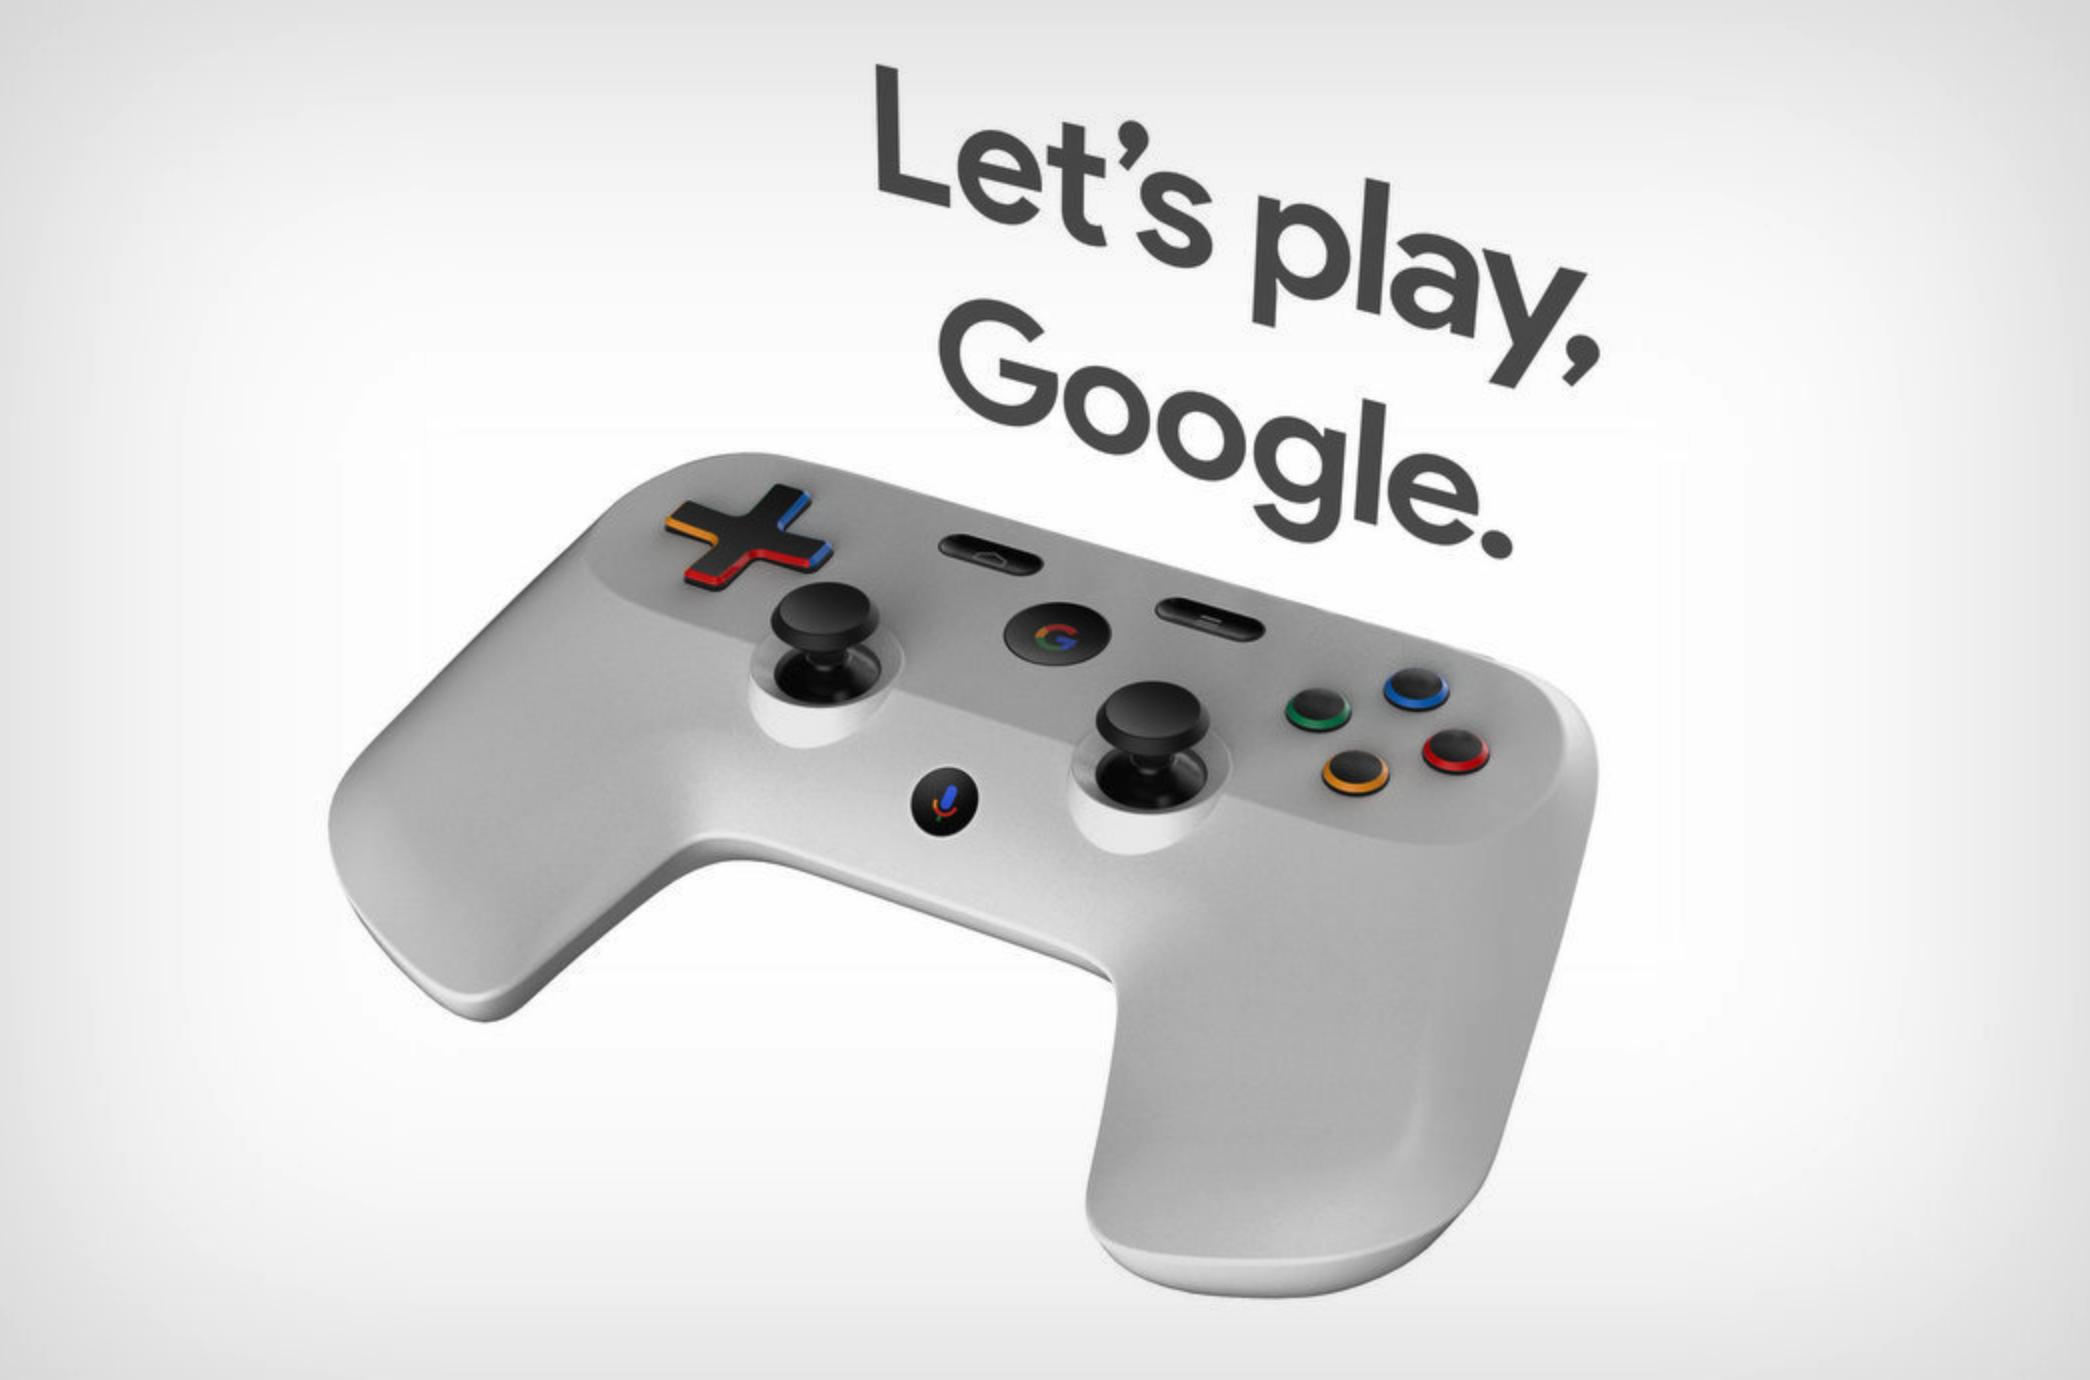 Google's Big Gaming Plans Revealed Early: Don't Expect a Console